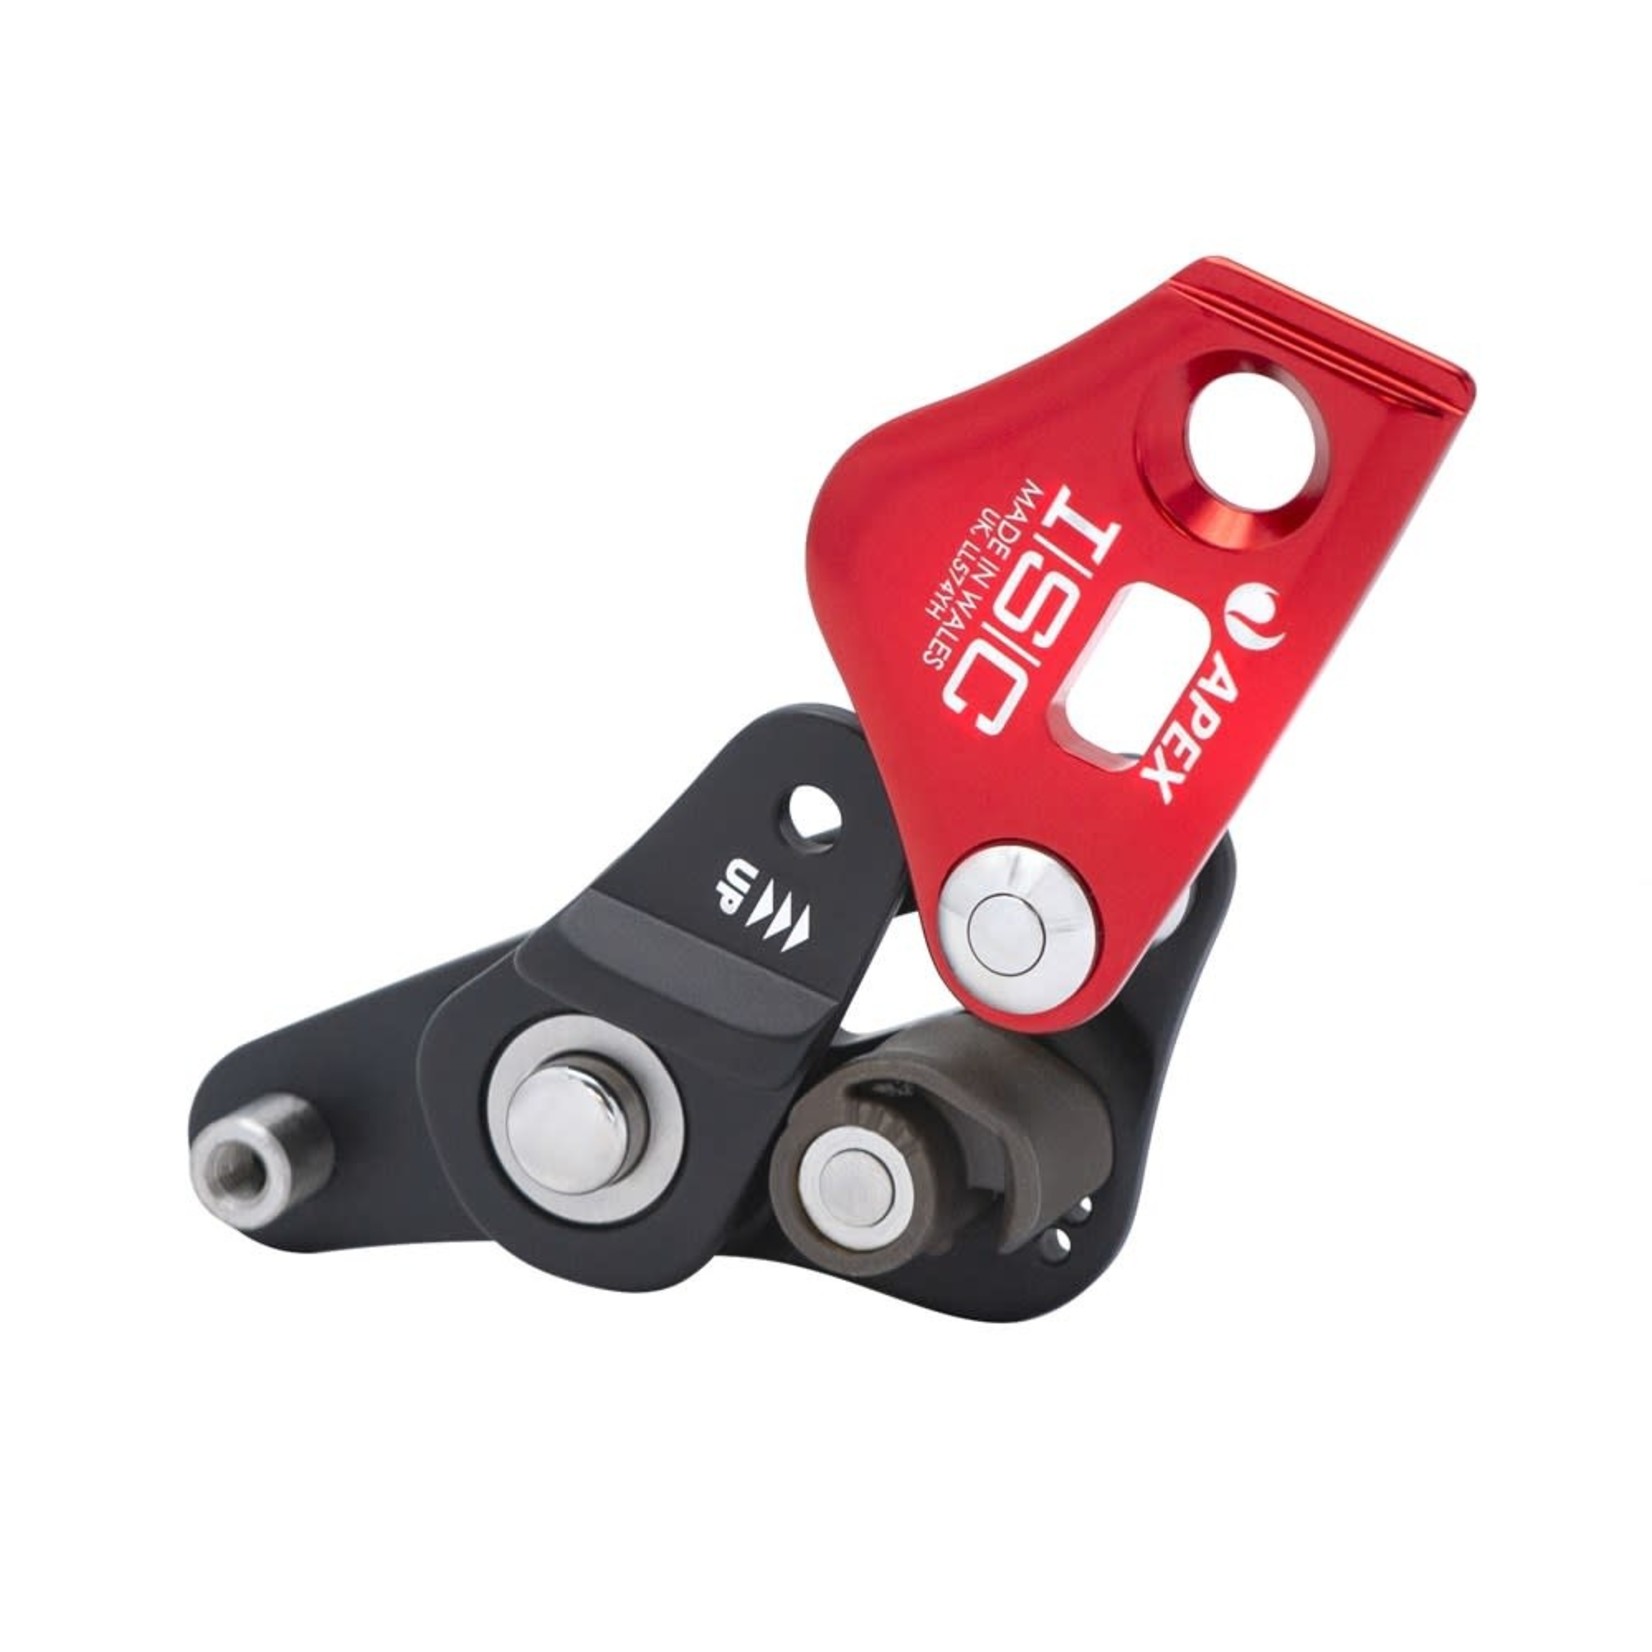 ISC APEX Rope Wrench, Black & Red. NOT for PPE